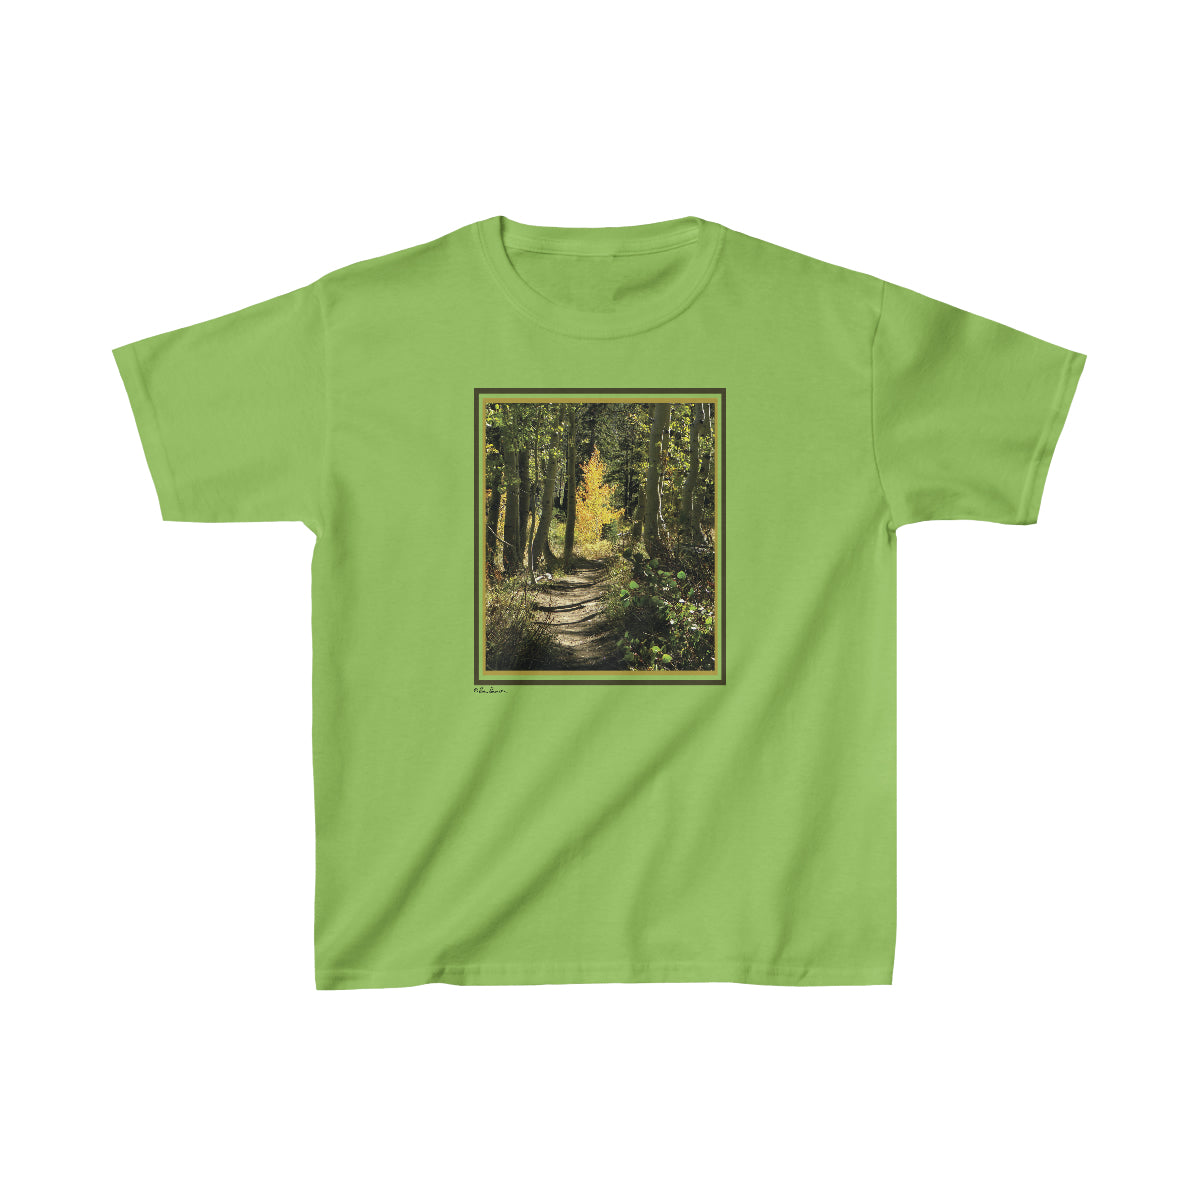 Flat front view of the lime green t-shirt